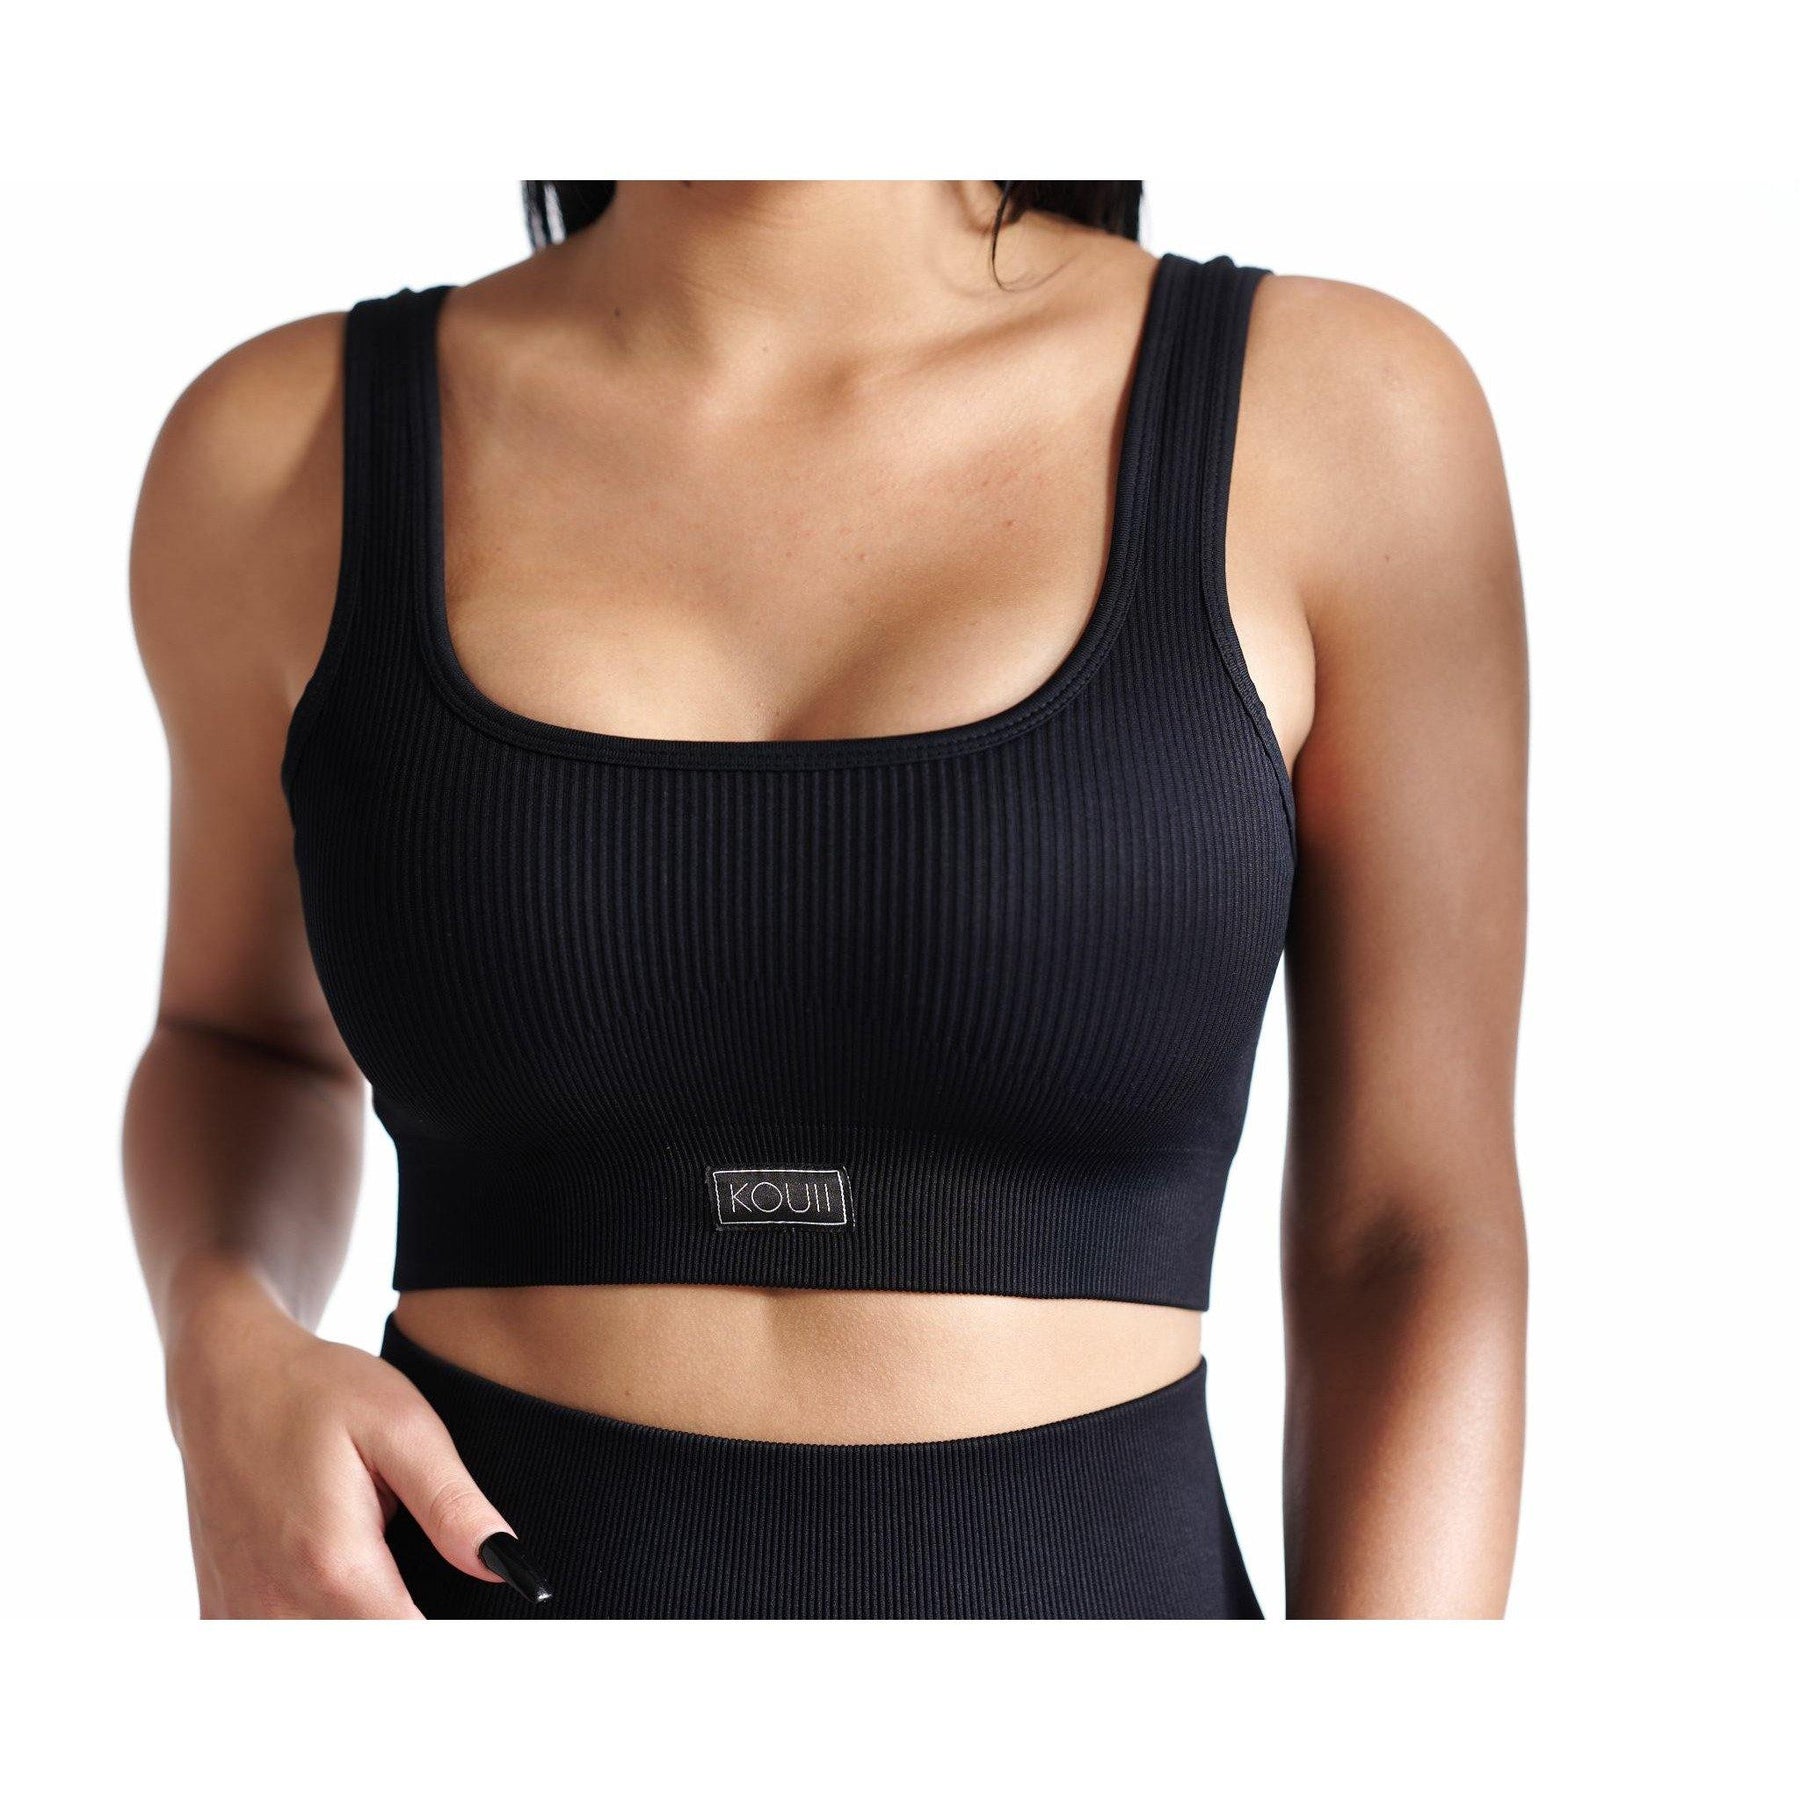 Synergy Cropped Sports Bra Magic Marble – Muscleup